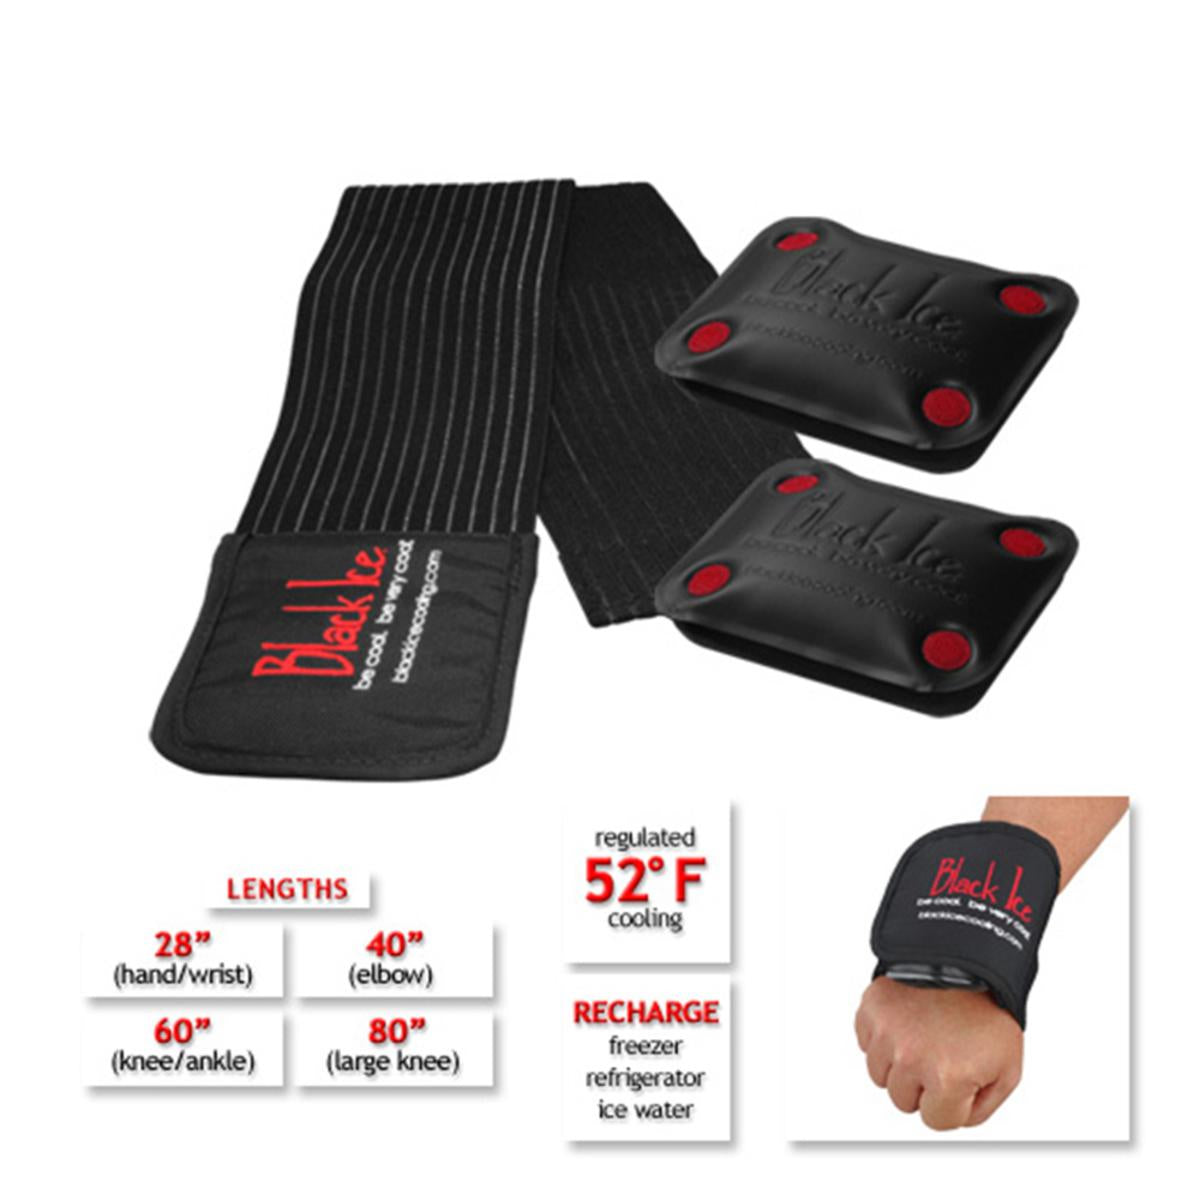 Black Ice CoolTherapy System - STX Sports Injury Relief 80